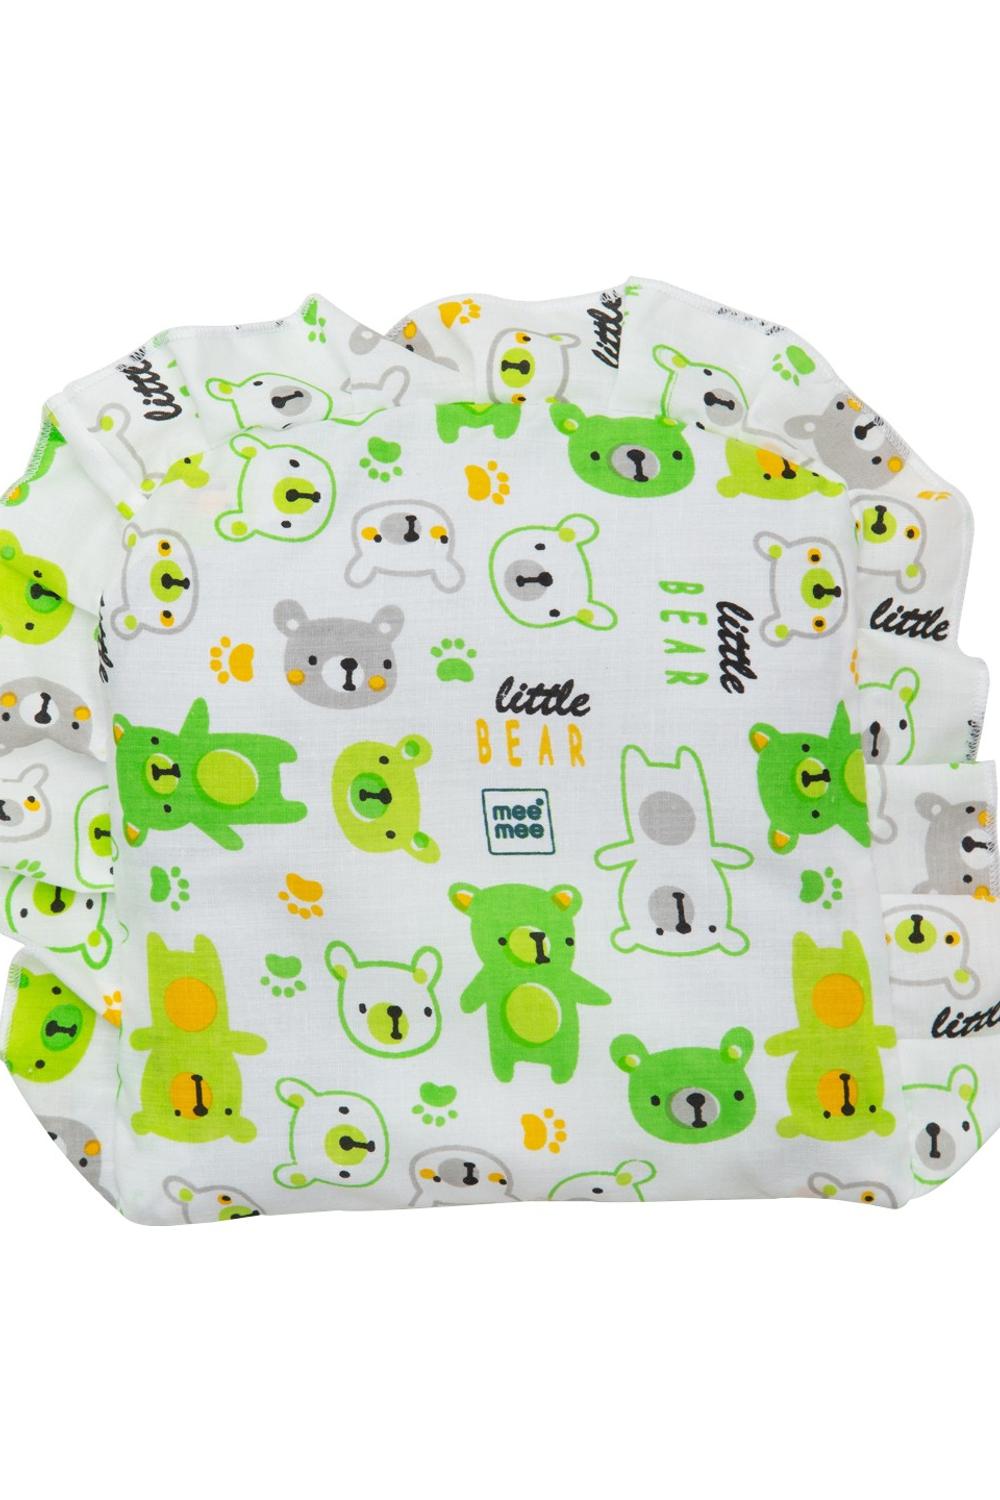 Mee Mee Breathable Baby Pillow with Mustard Seeds (Green)